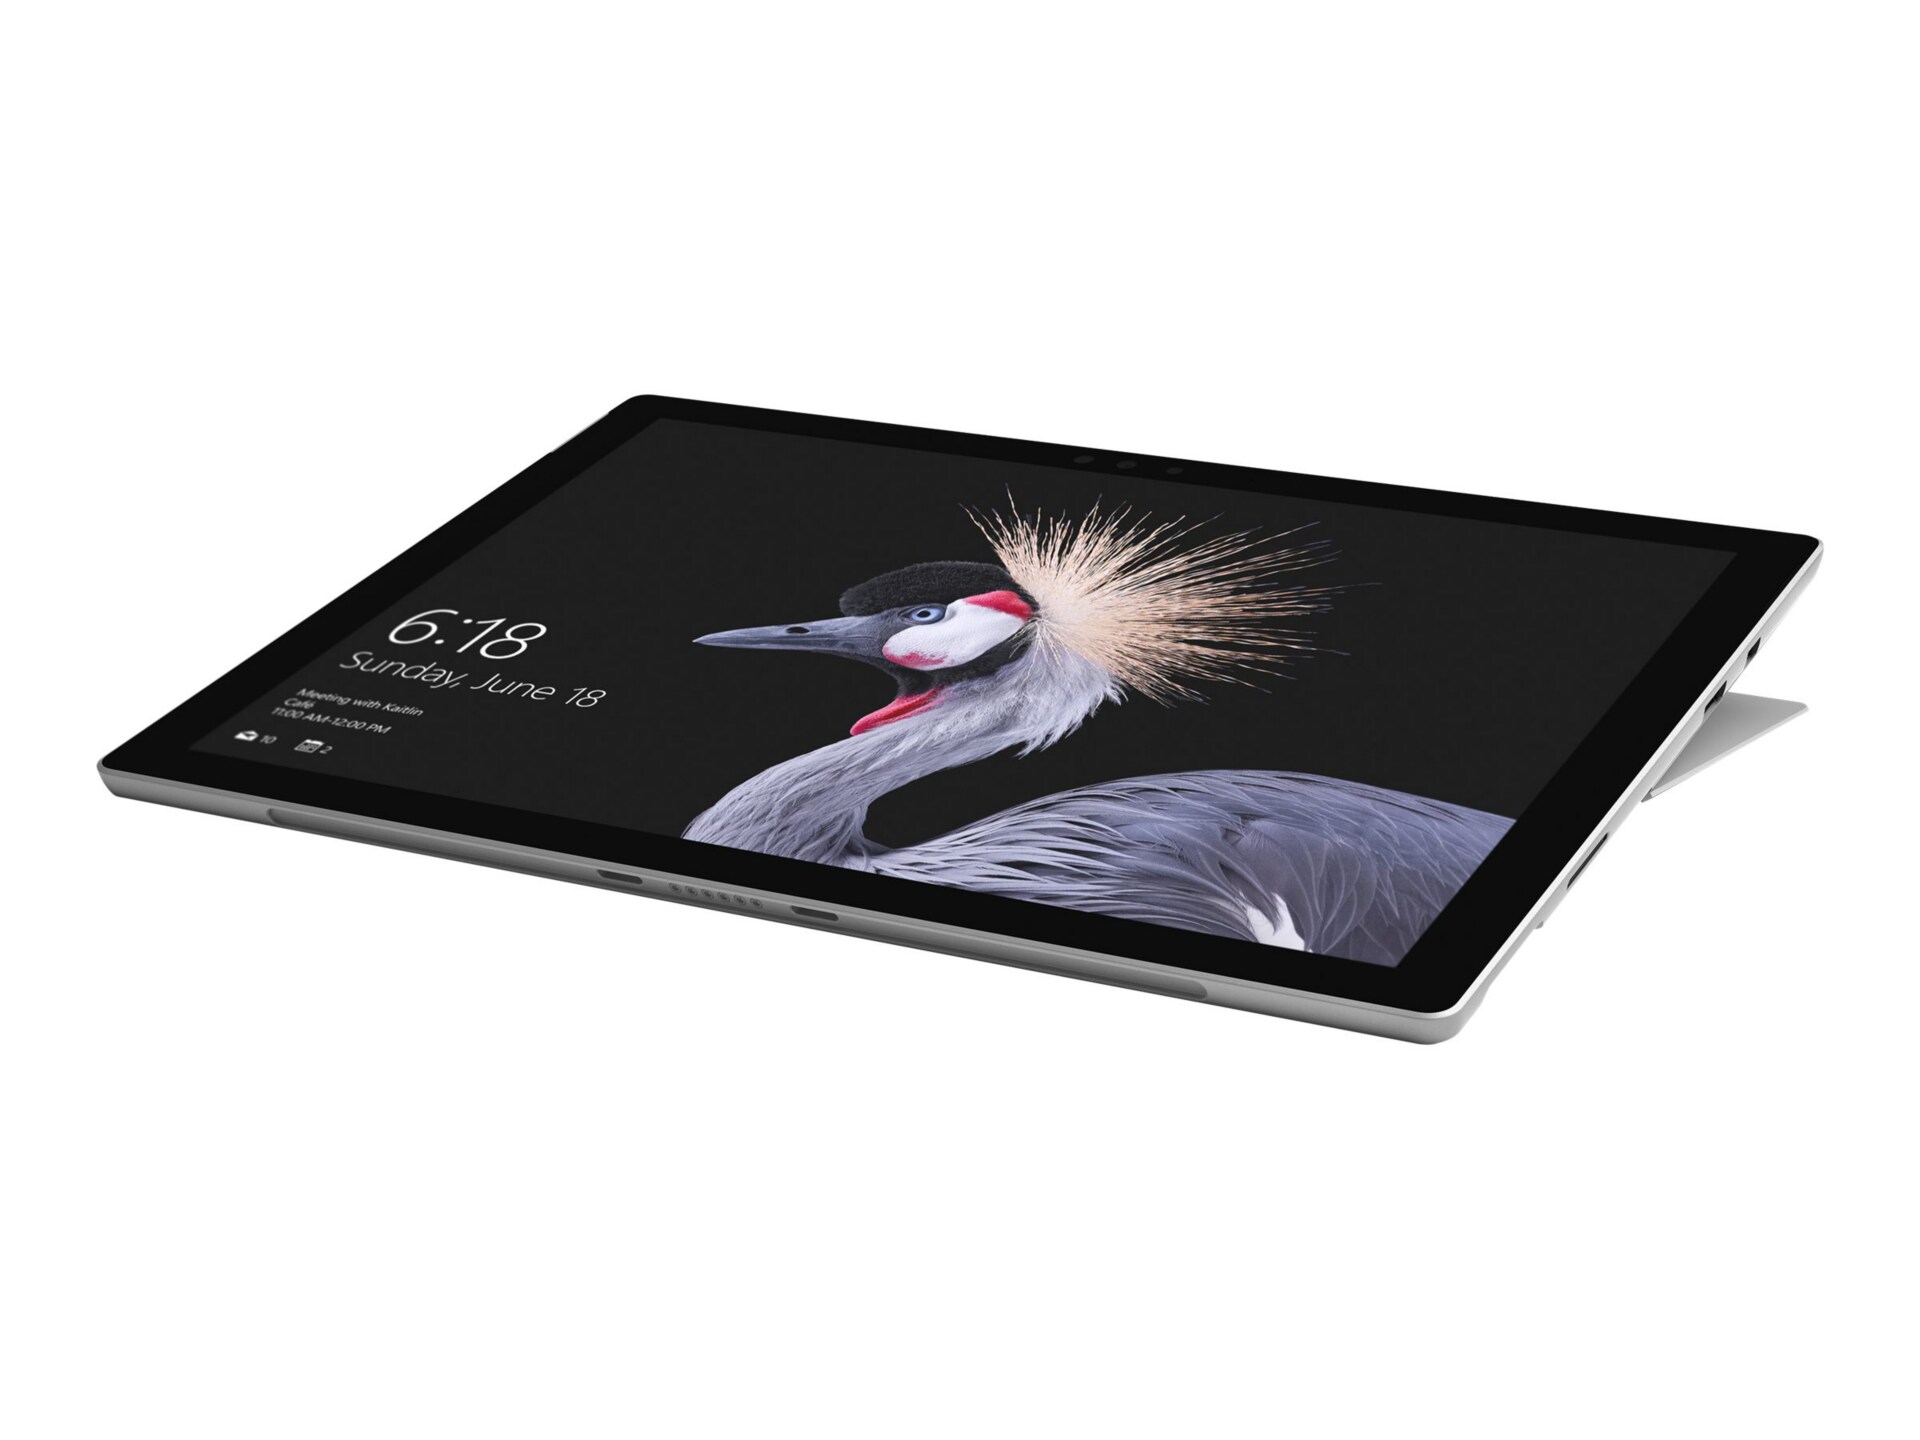 Microsoft Surface Pro - 12.3" - I5 4GB/128GB - Silver Tablet